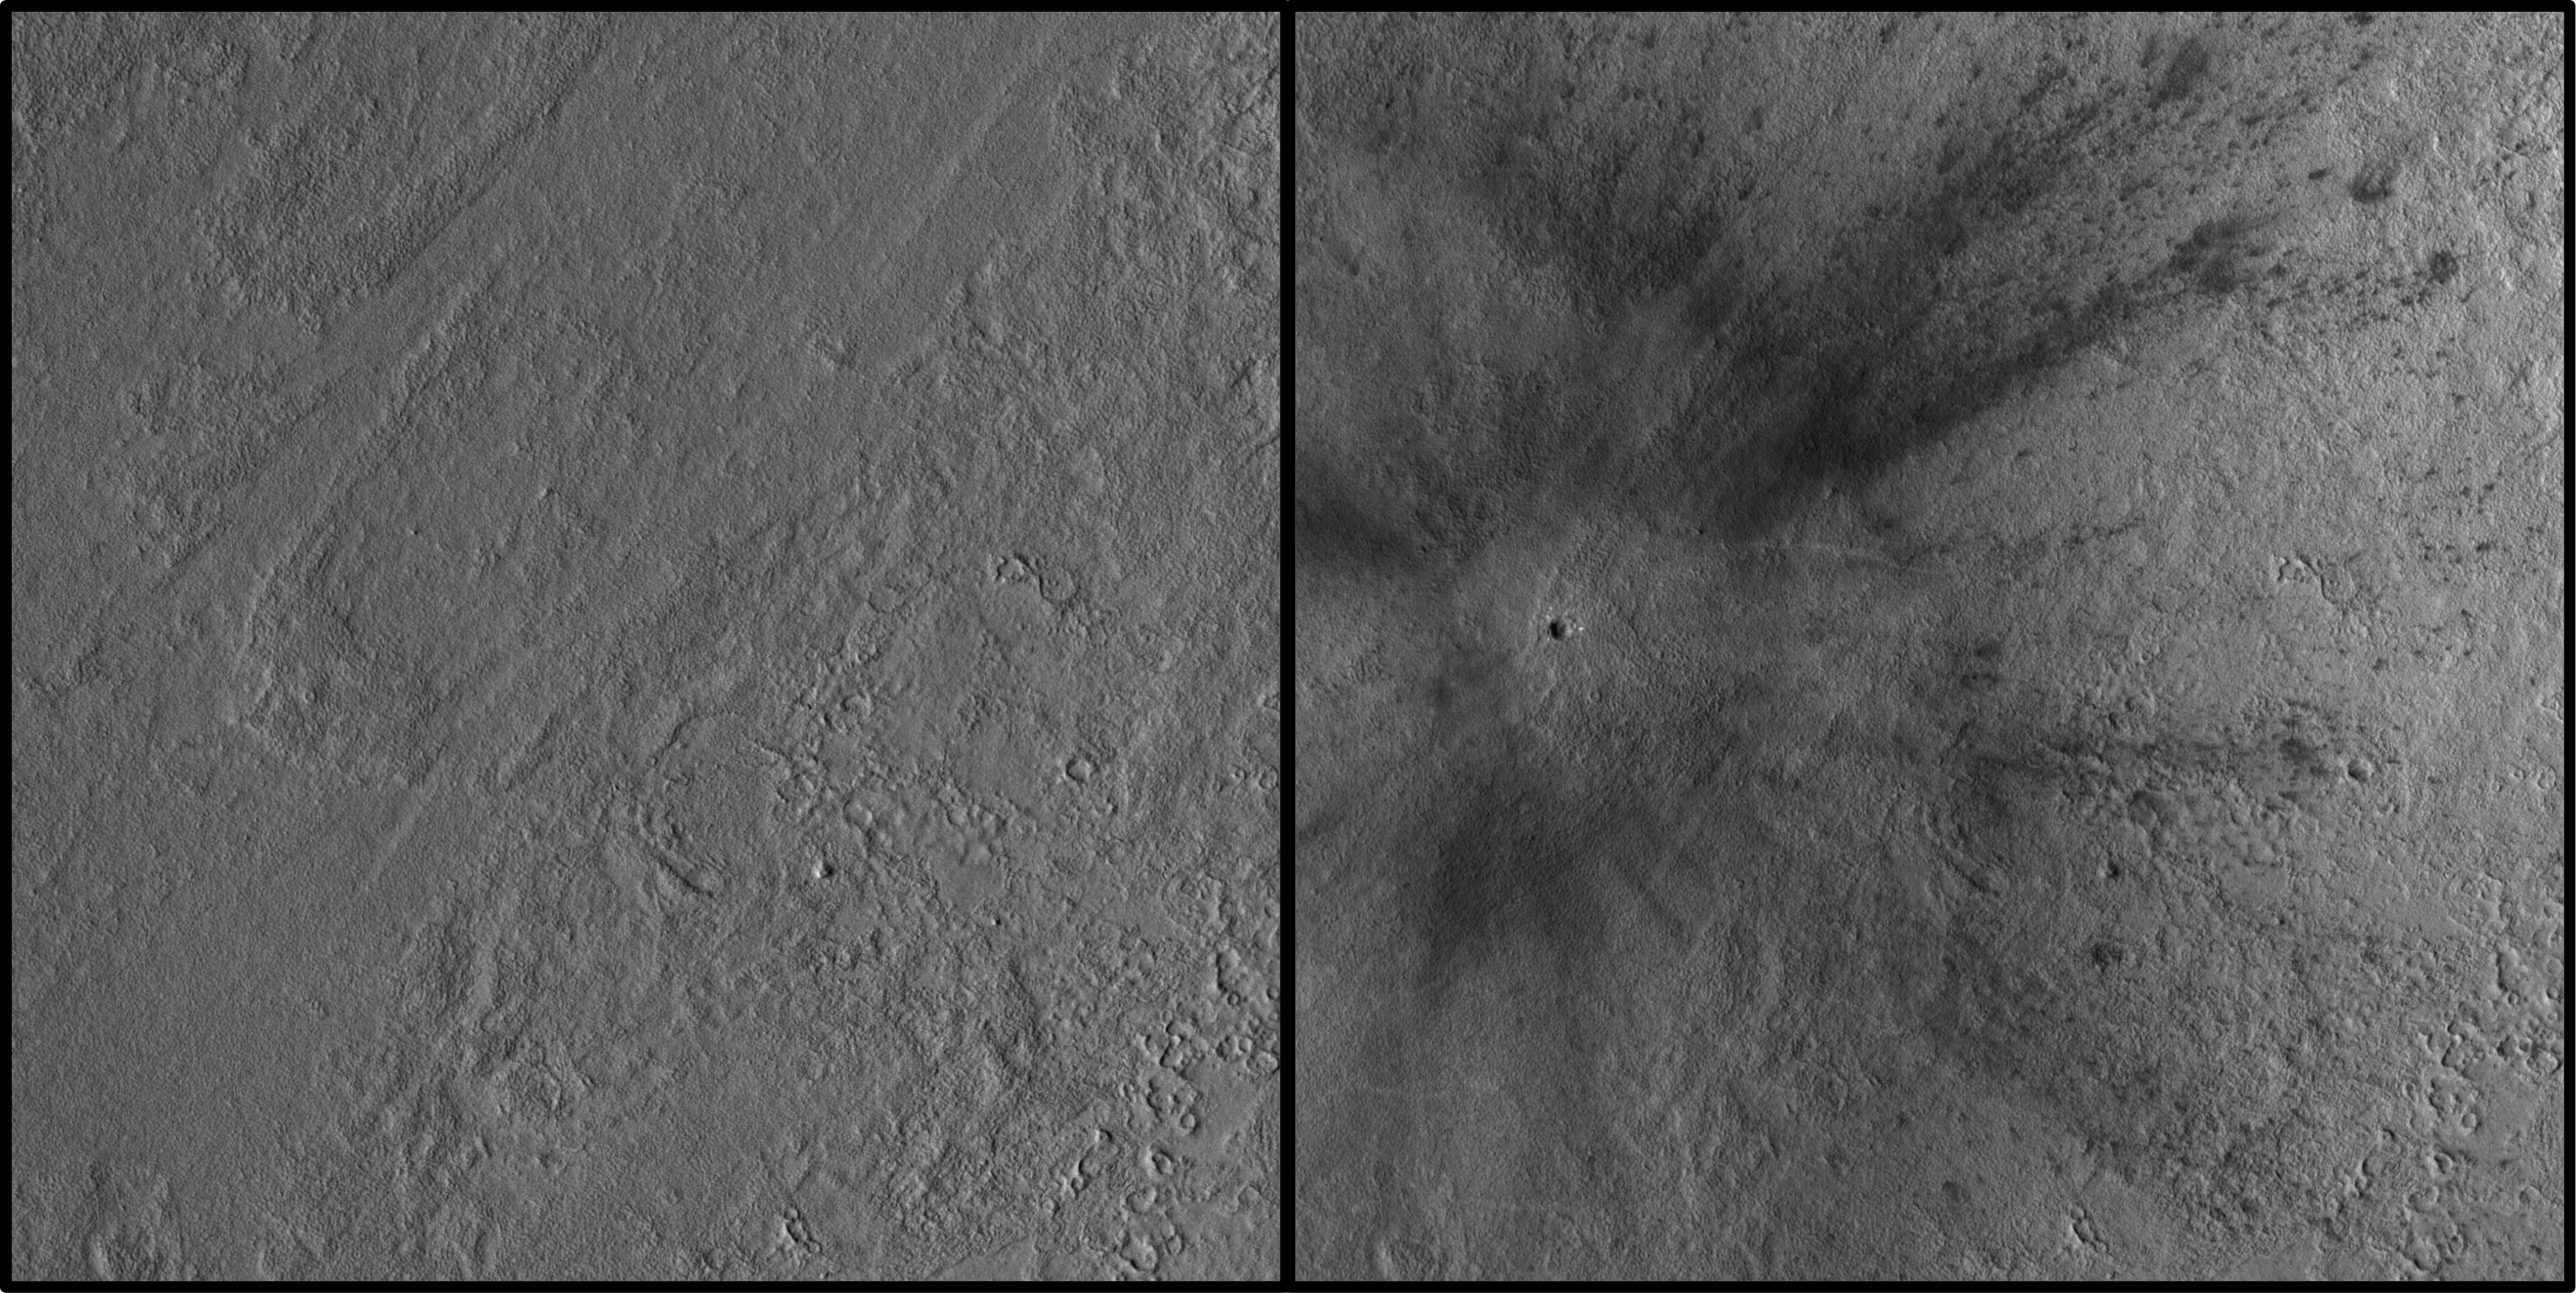 Images Show Fresh Crater on Mars Caused by Major Meteorite Impact